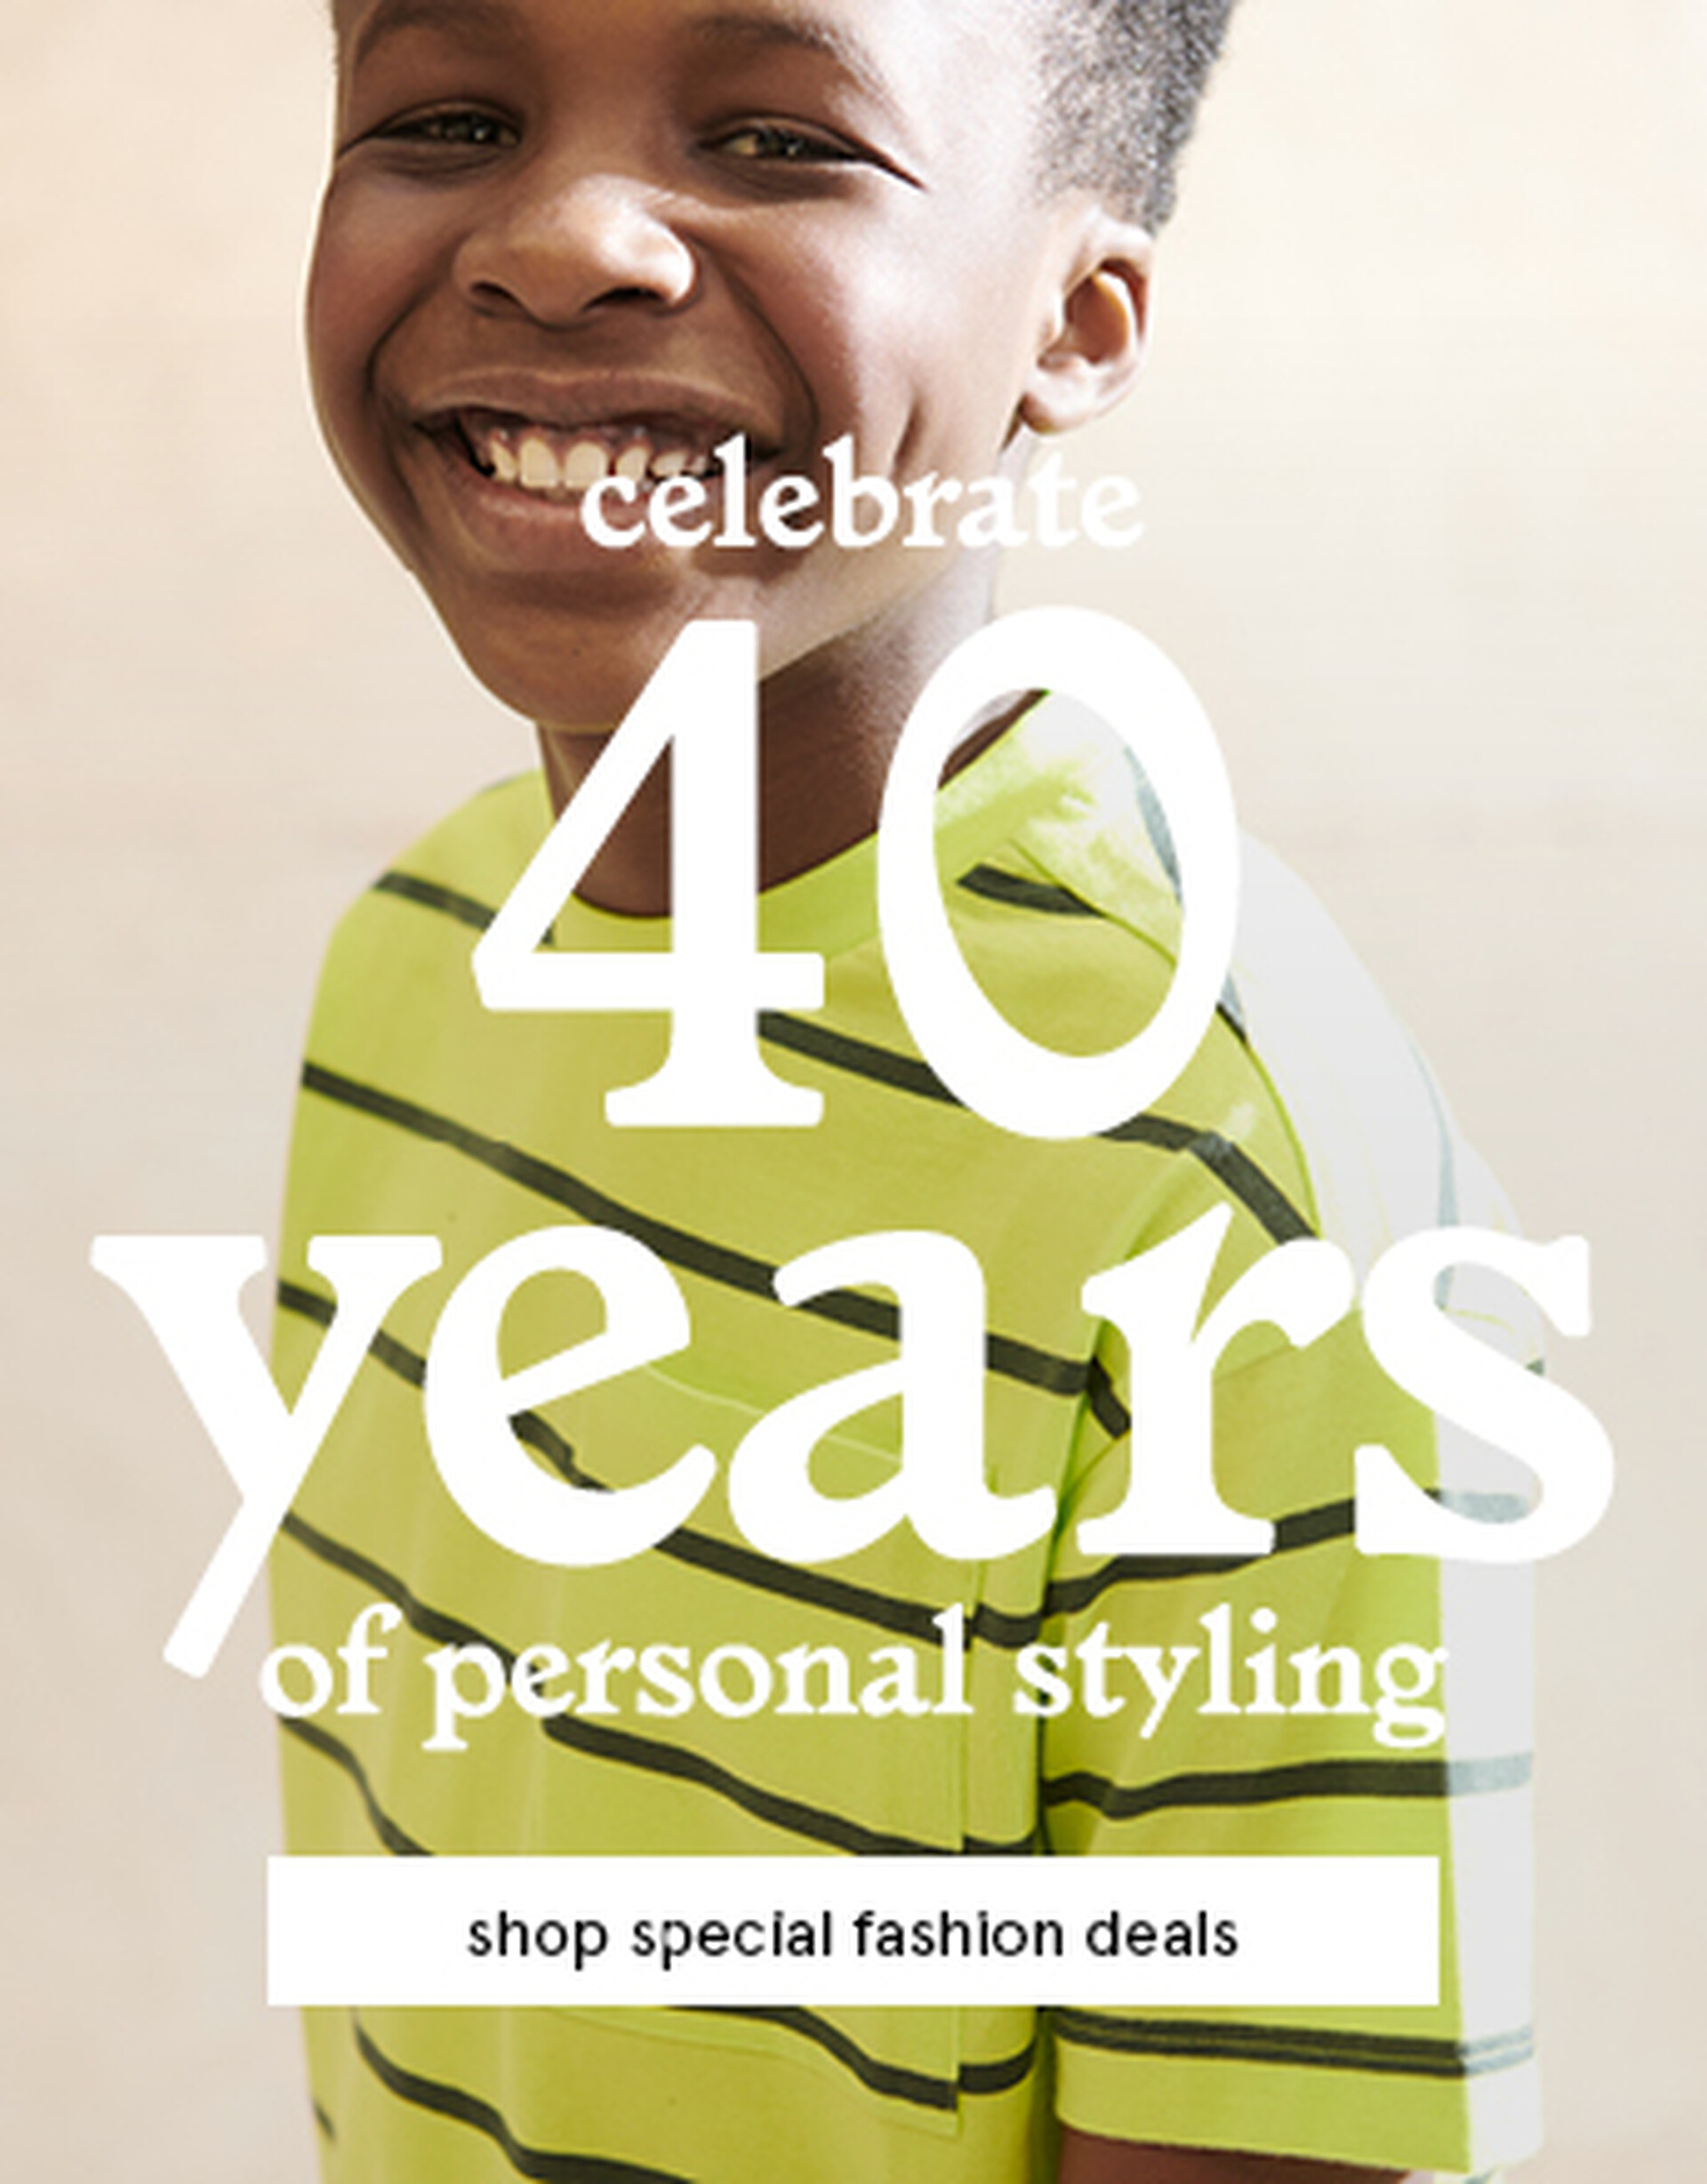 celebrate 40 years of personal styling